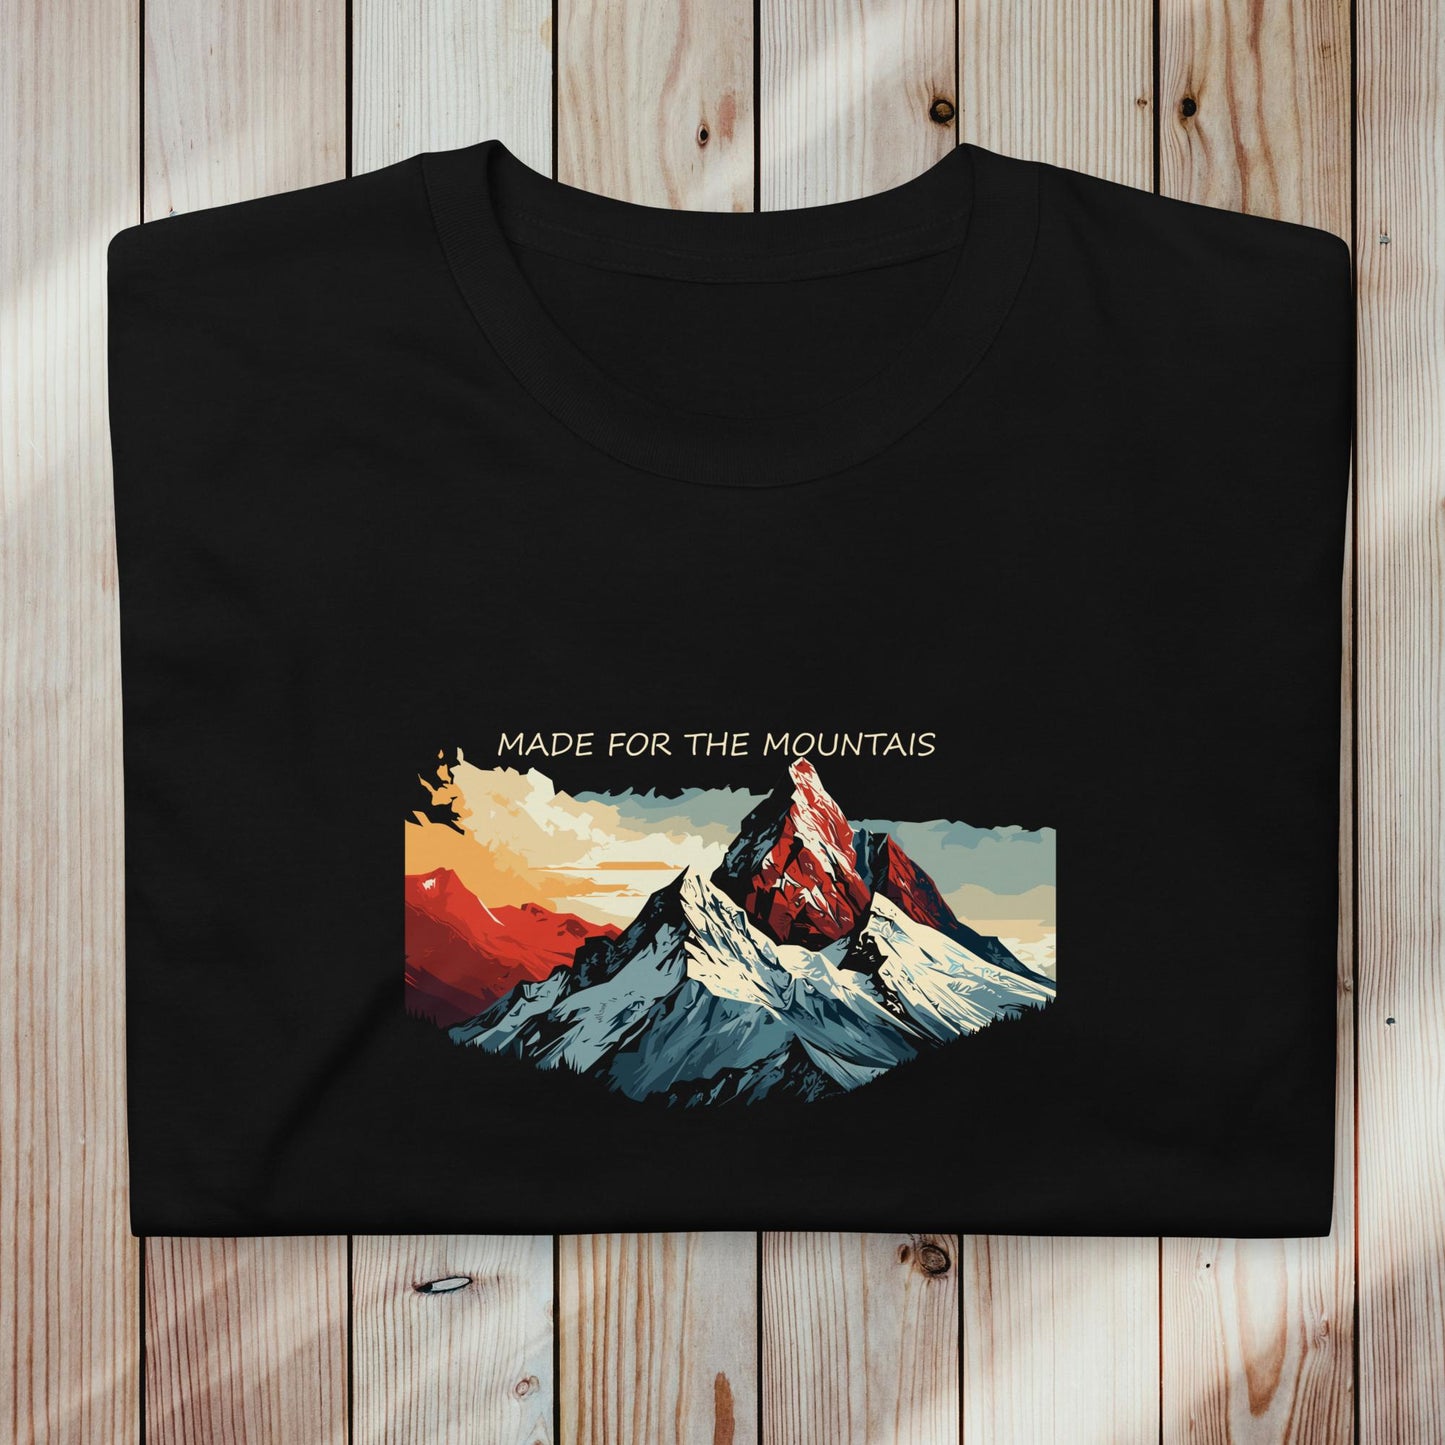 Unisex T-shirt: "Made for the mountains" 3